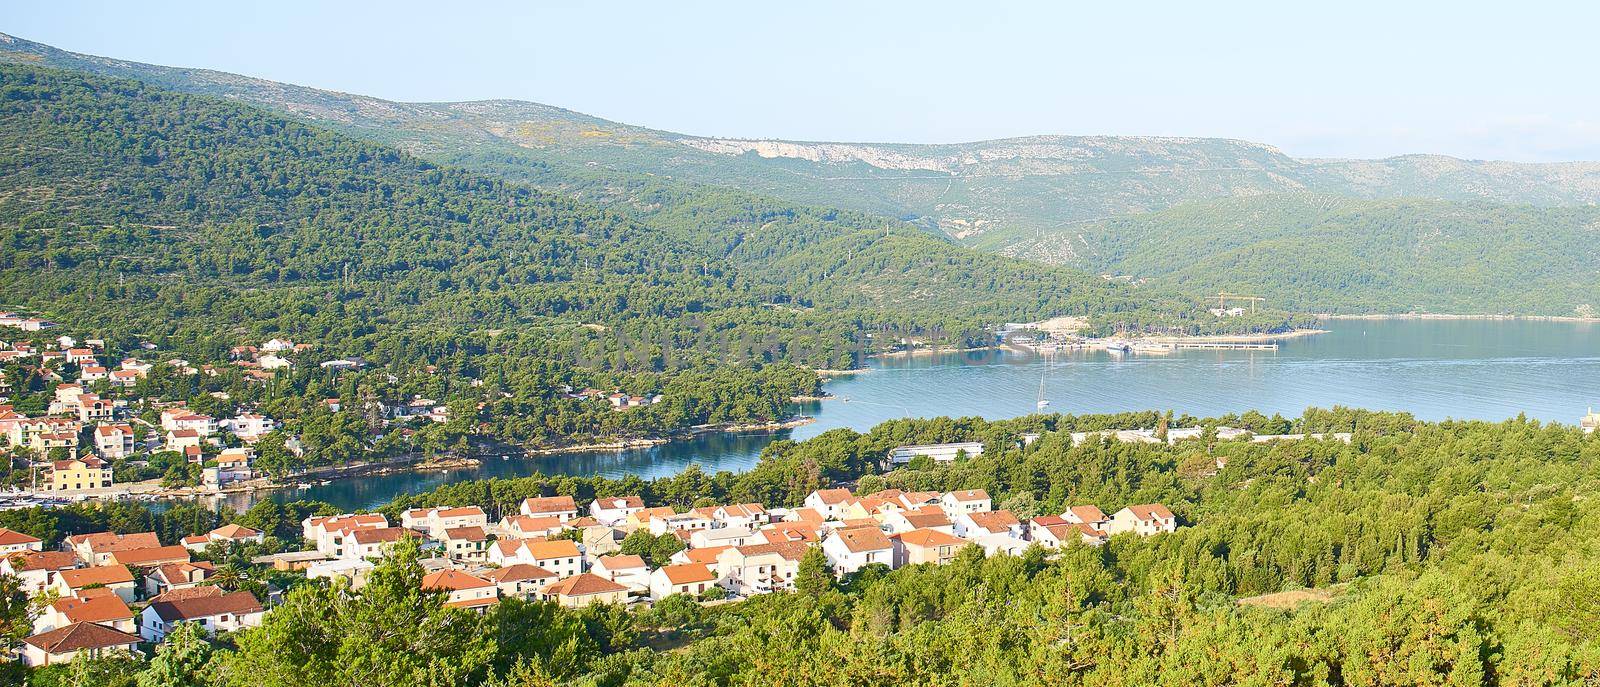 Panorama view of Stari Grad town by Jindrich_Blecha